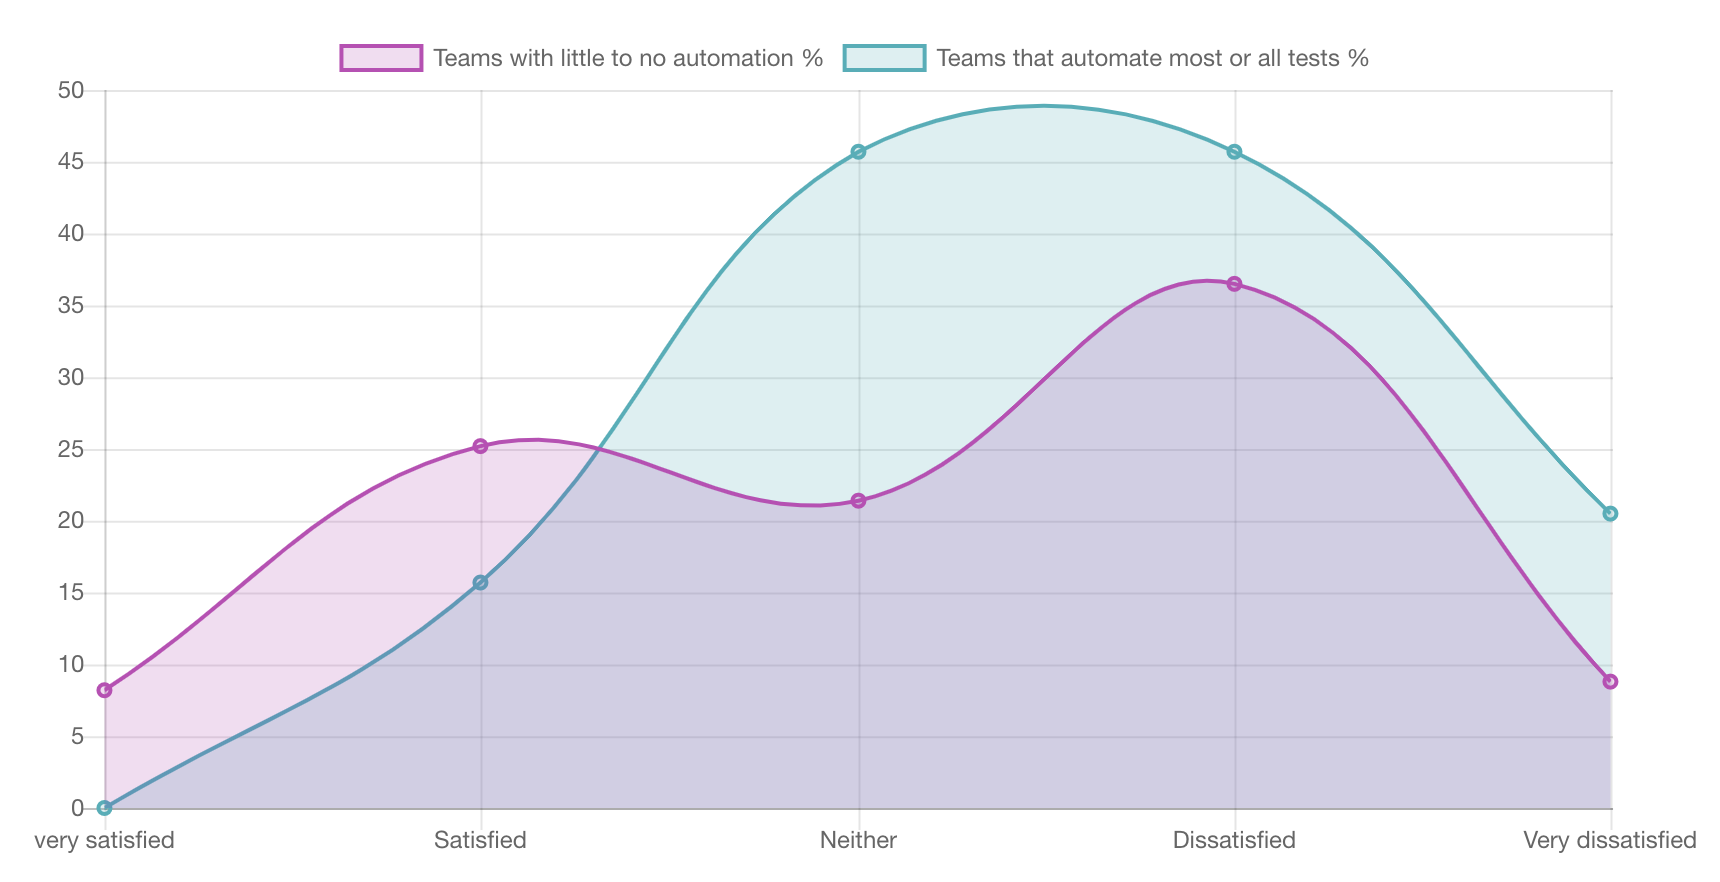 A line graph showing that teams that automate most or all of their tests are more dissatisfied with their testing process.